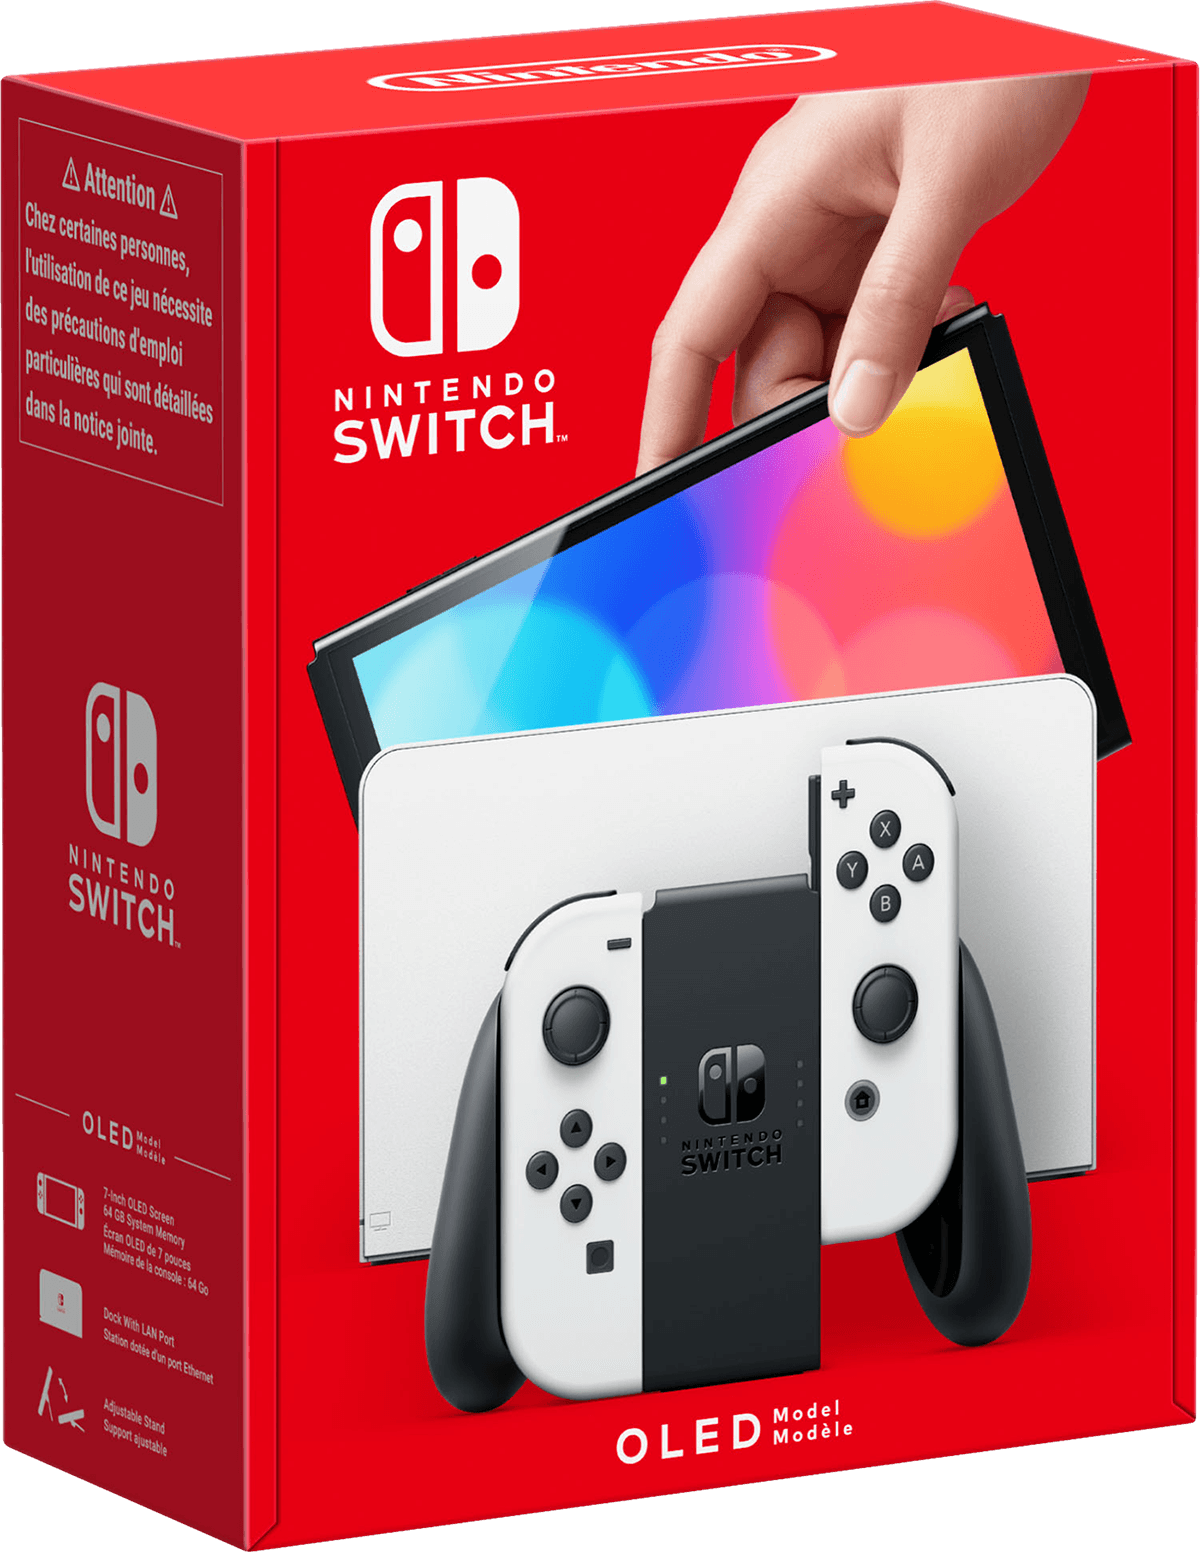 Nintendo Switch 64GB OLED Model Console - White (NS / Switch)